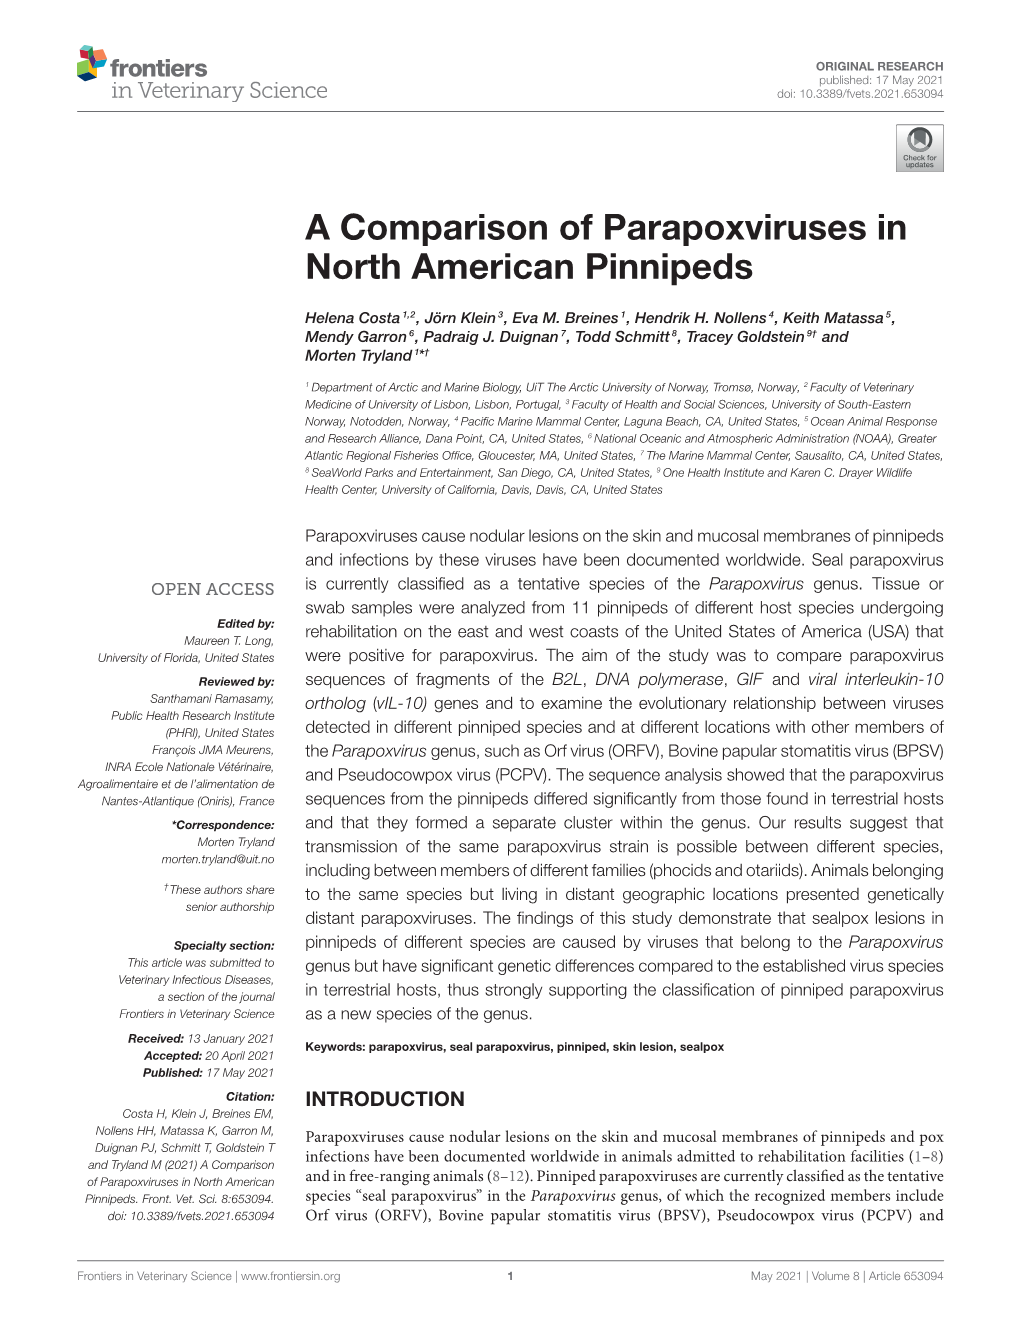 A Comparison of Parapoxviruses in North American Pinnipeds